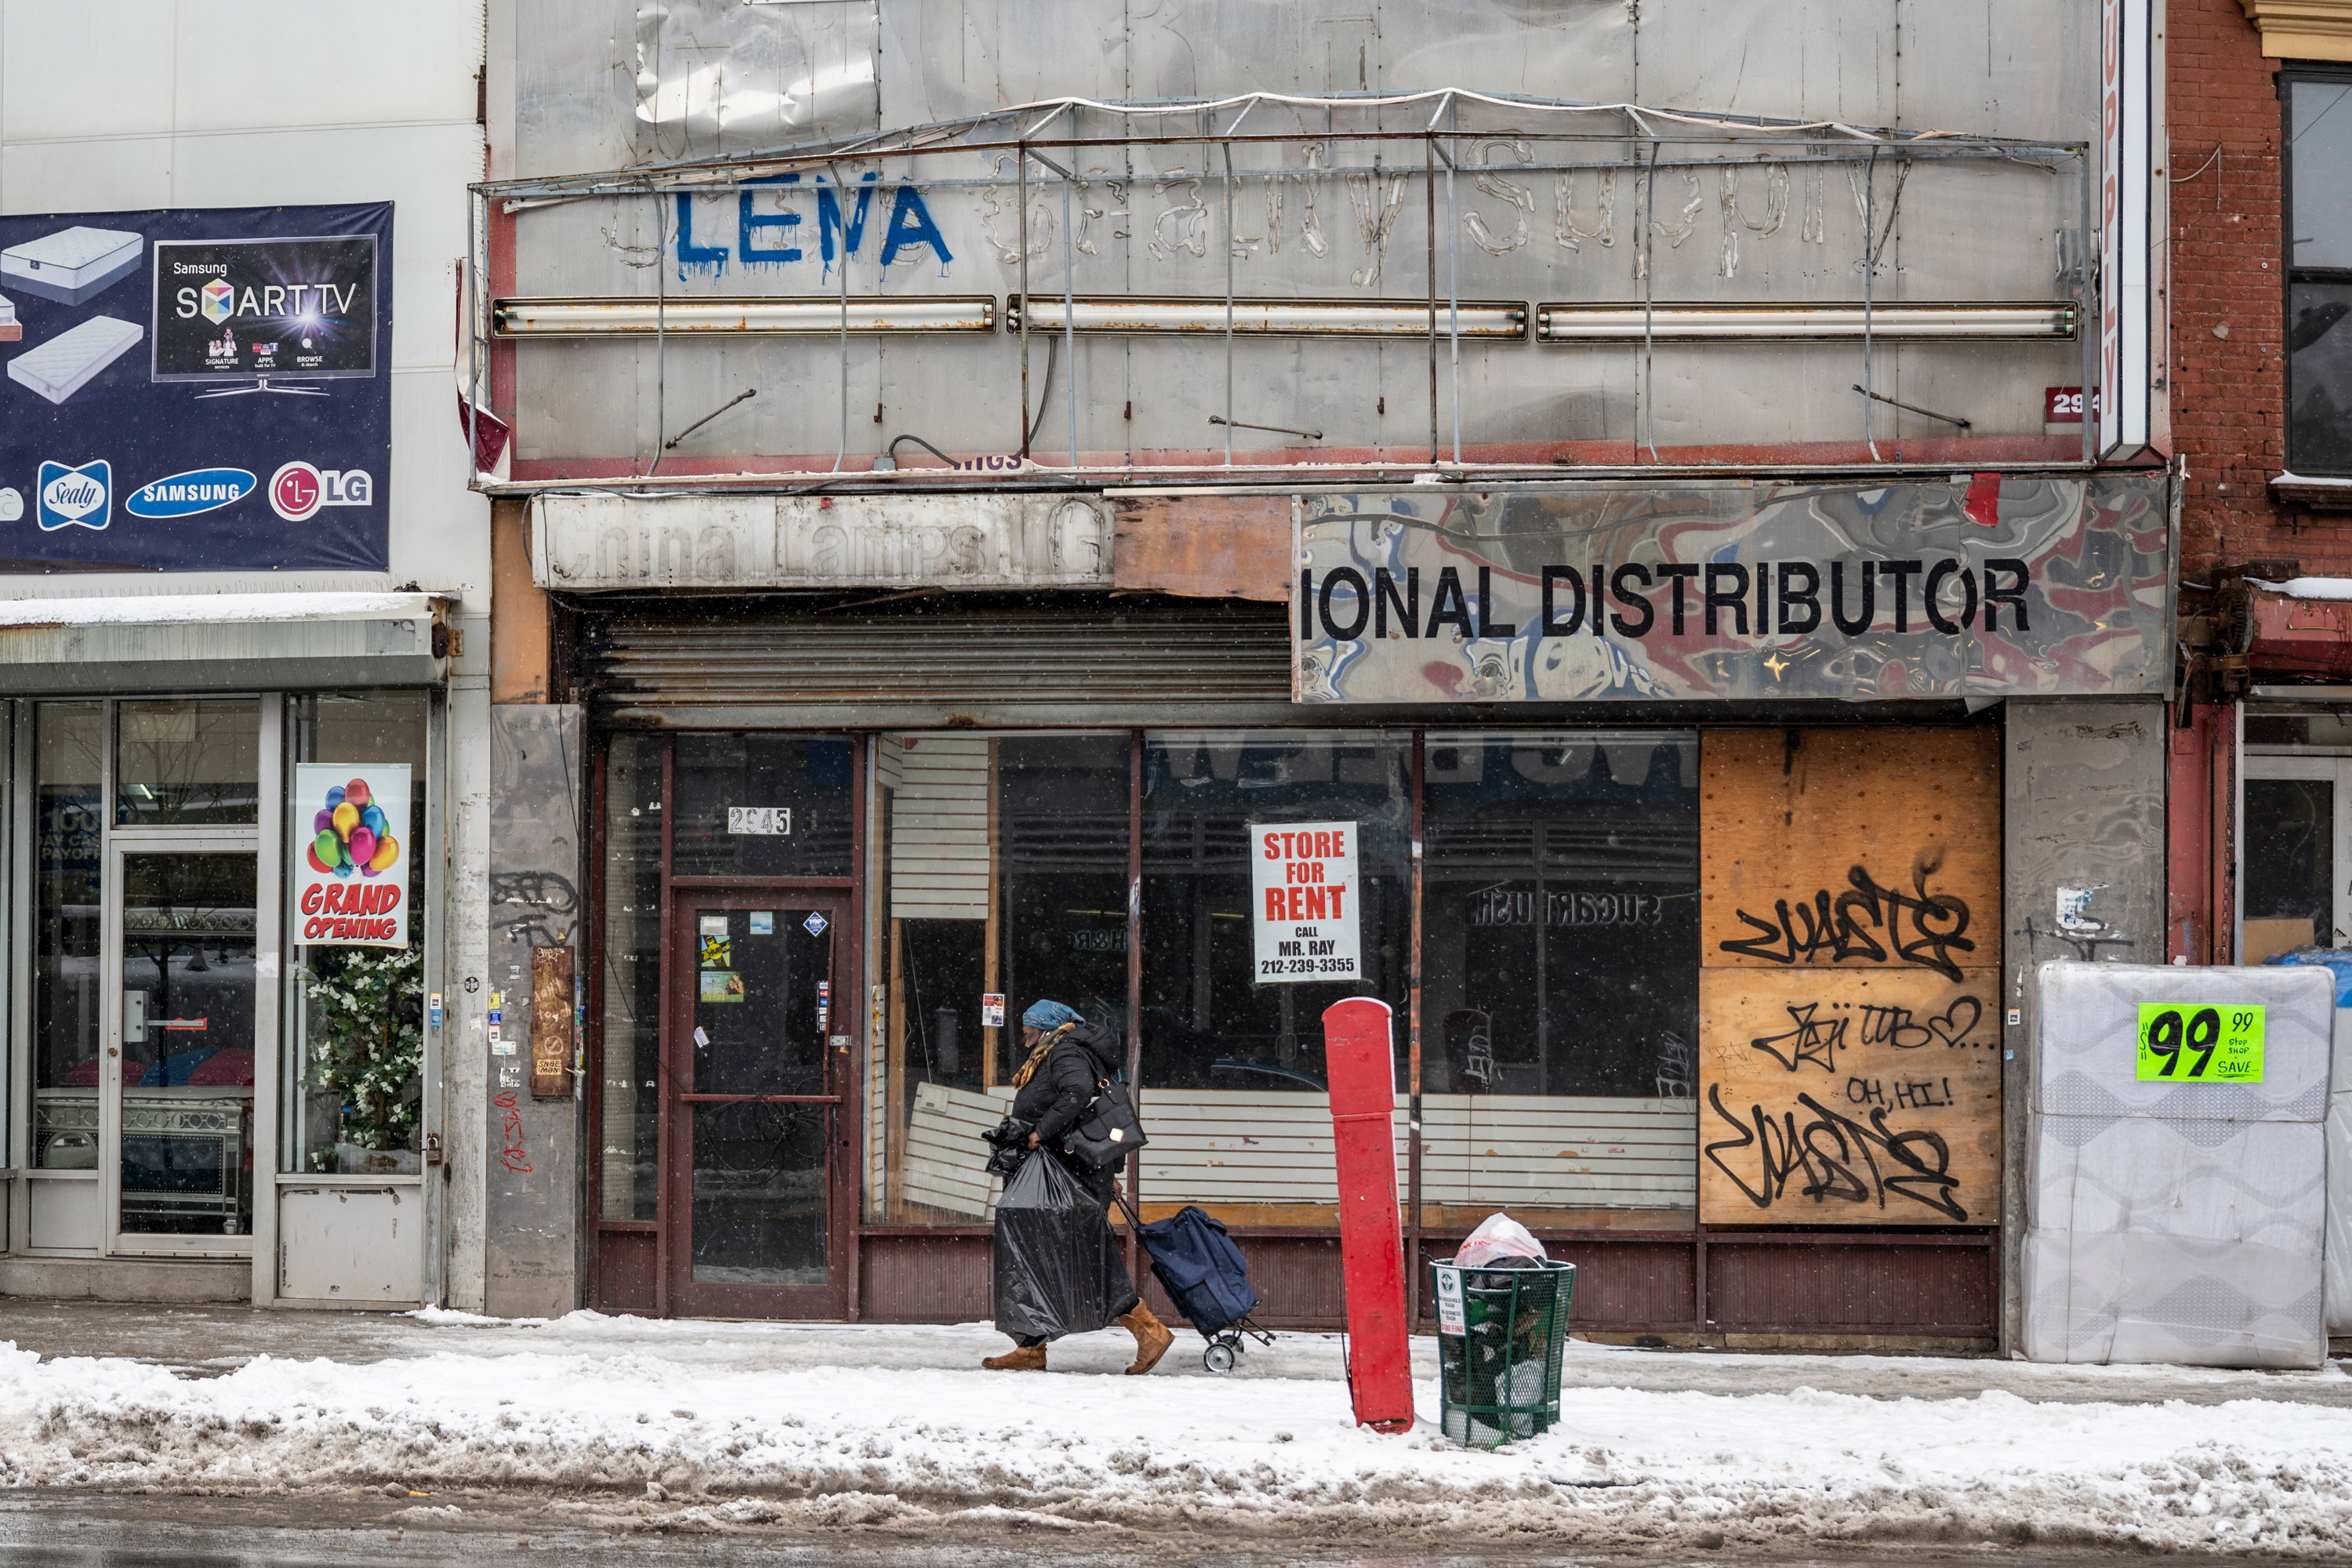 Some businesses showed signs of economic struggles in the South Bronx’s Hub, Feb. 19, 2021.